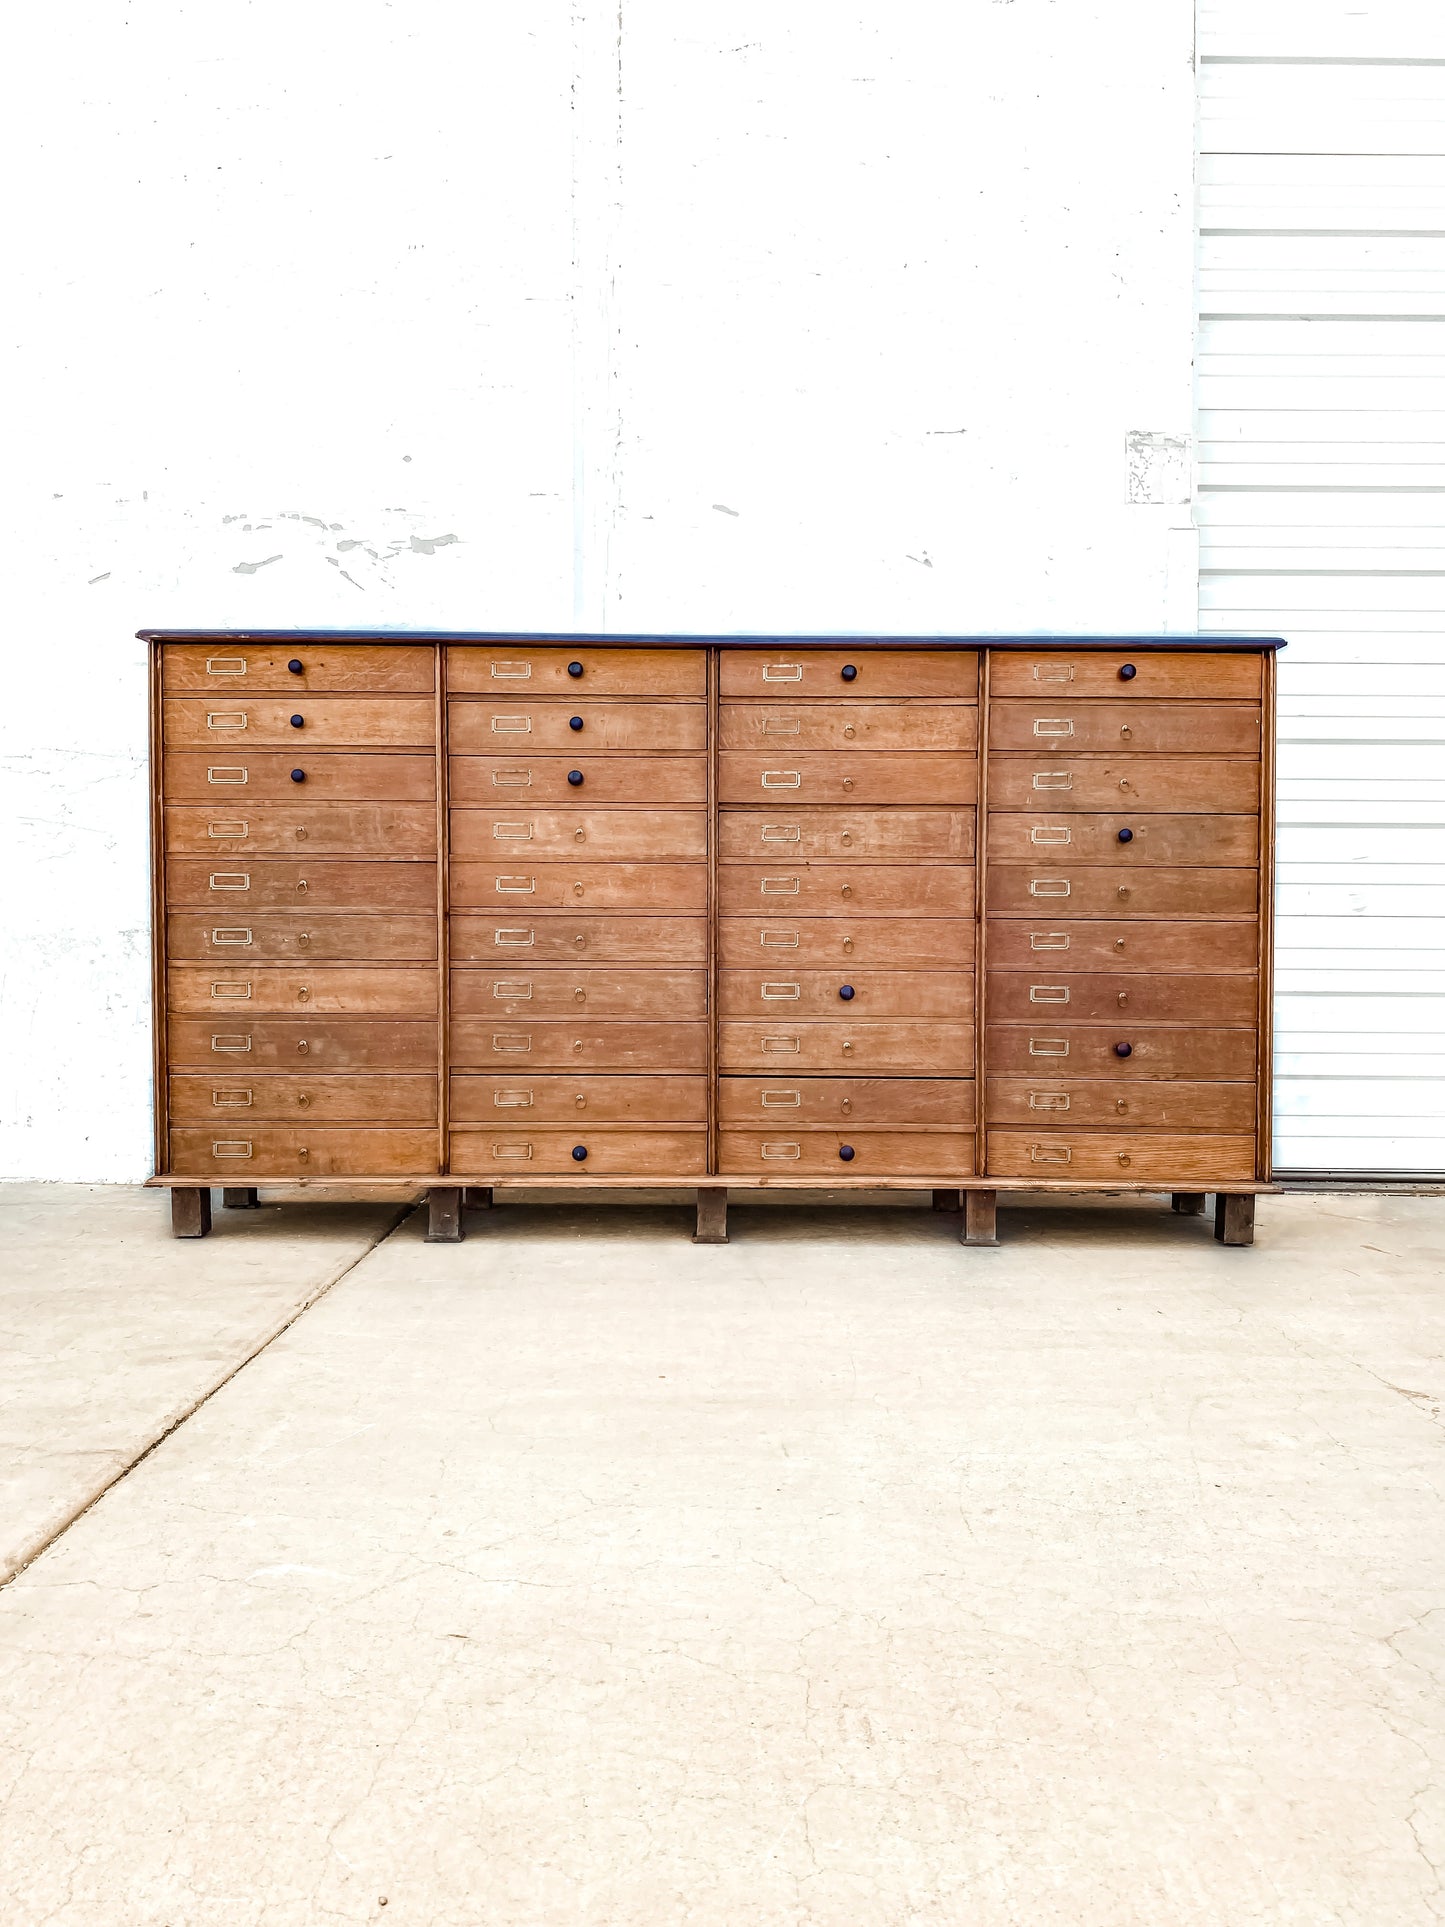 Antique Wood Cabinet with 40 Drawers